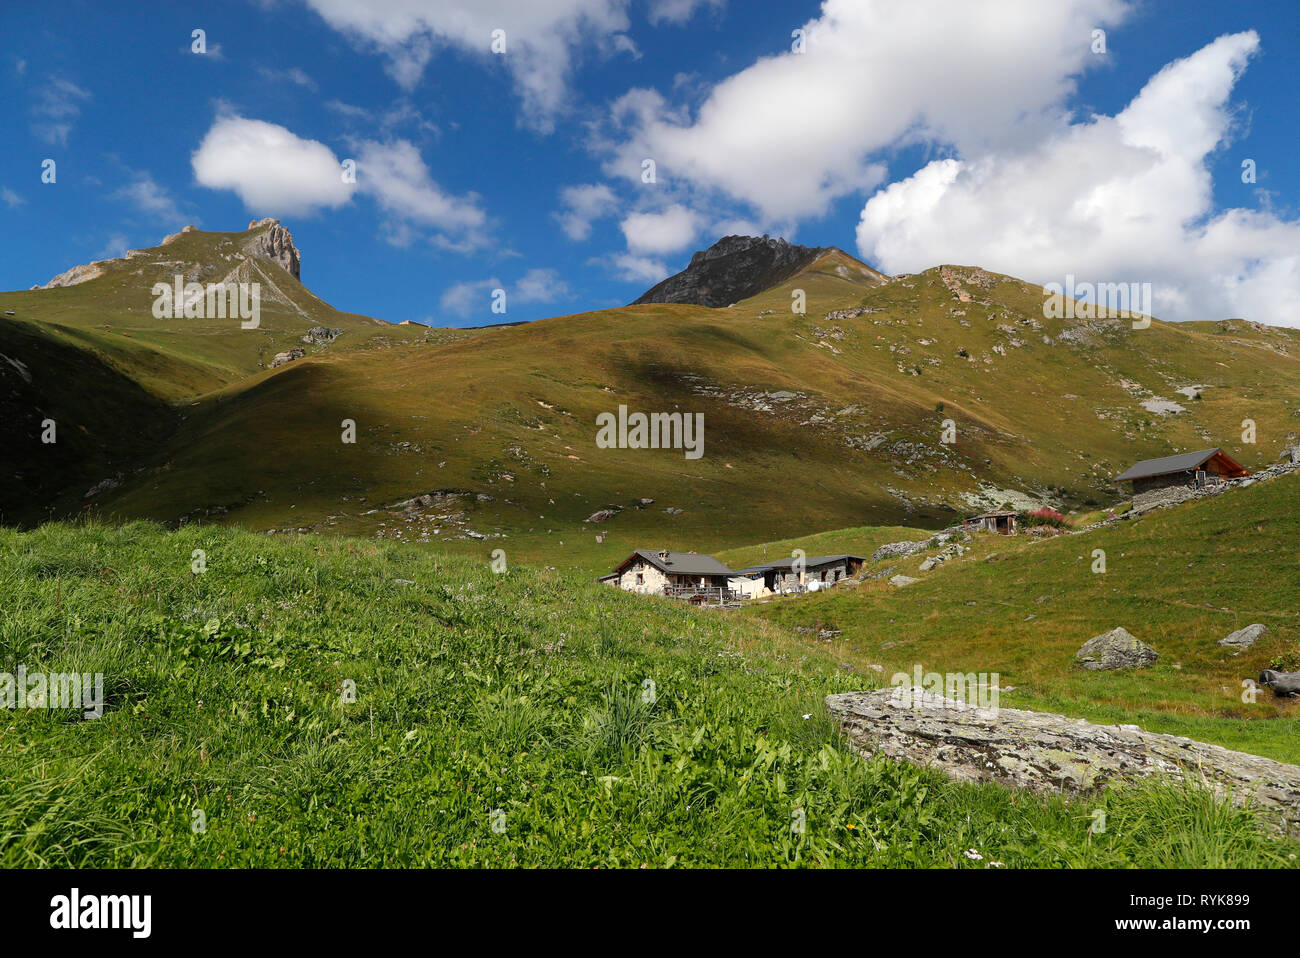 French Alps. Artisanal Beaufort cheese factory on high pastures.  Peisey Nancroix. France. Stock Photo